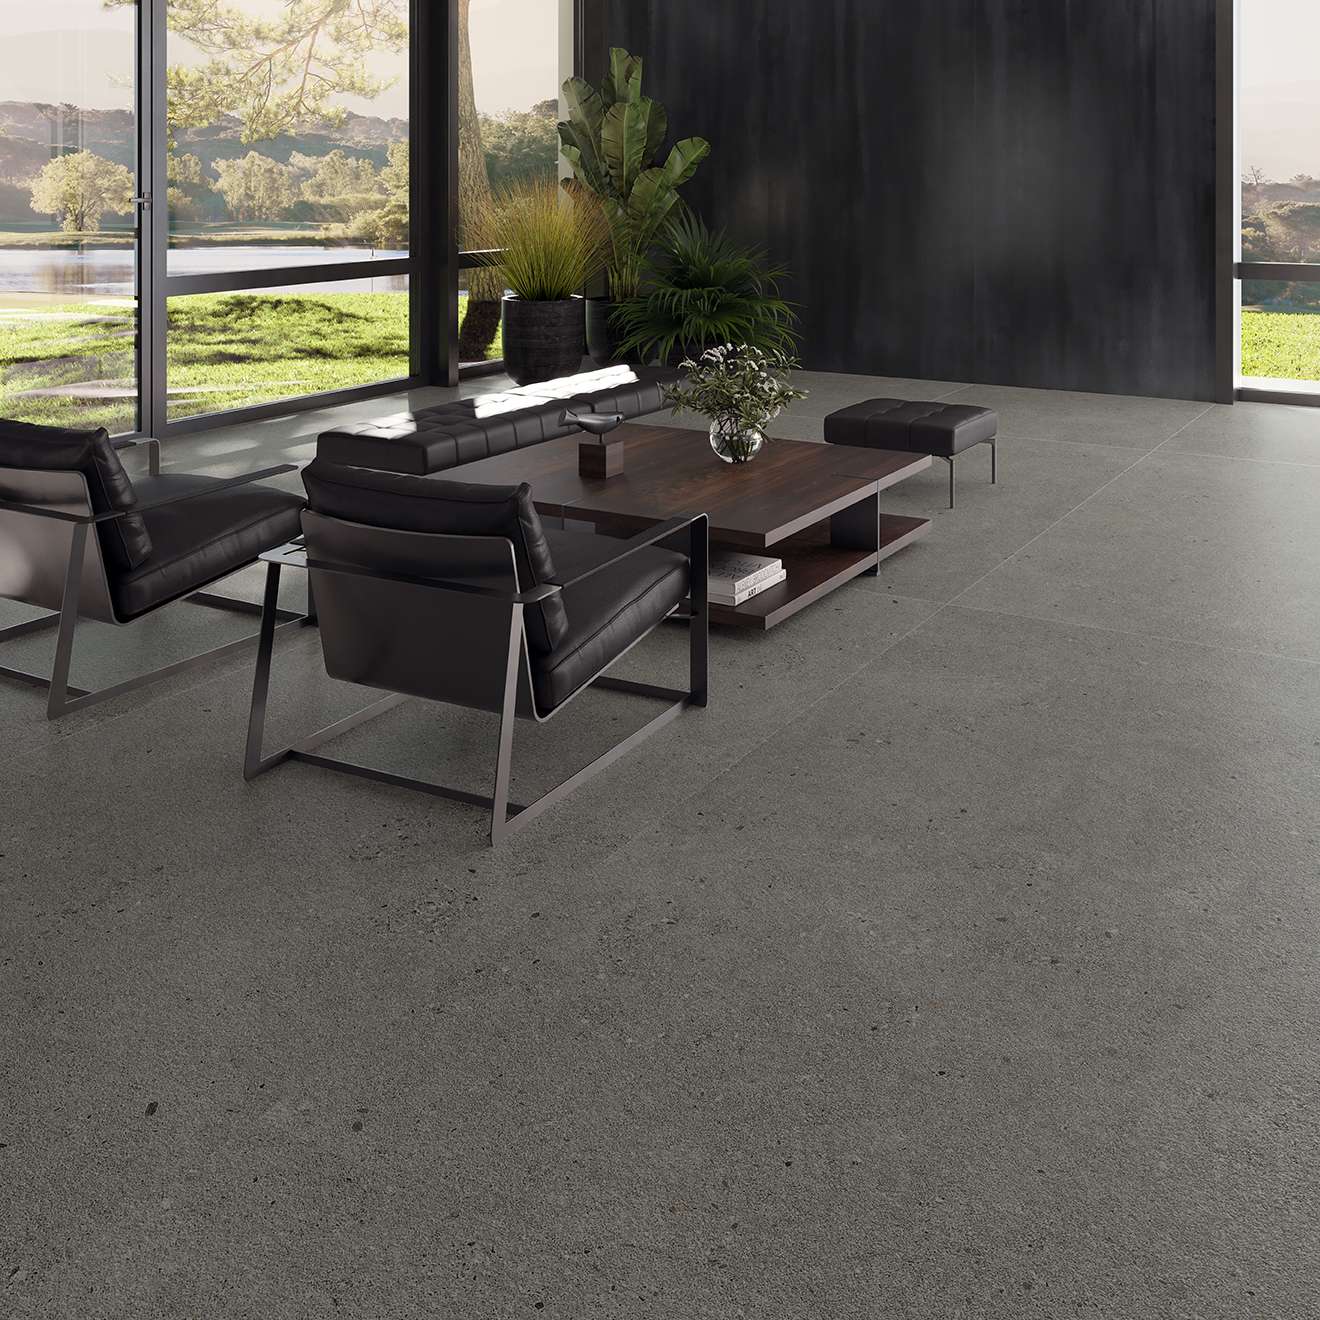 Outdoor living, Inalco MDi from CRL stone outdoor surface